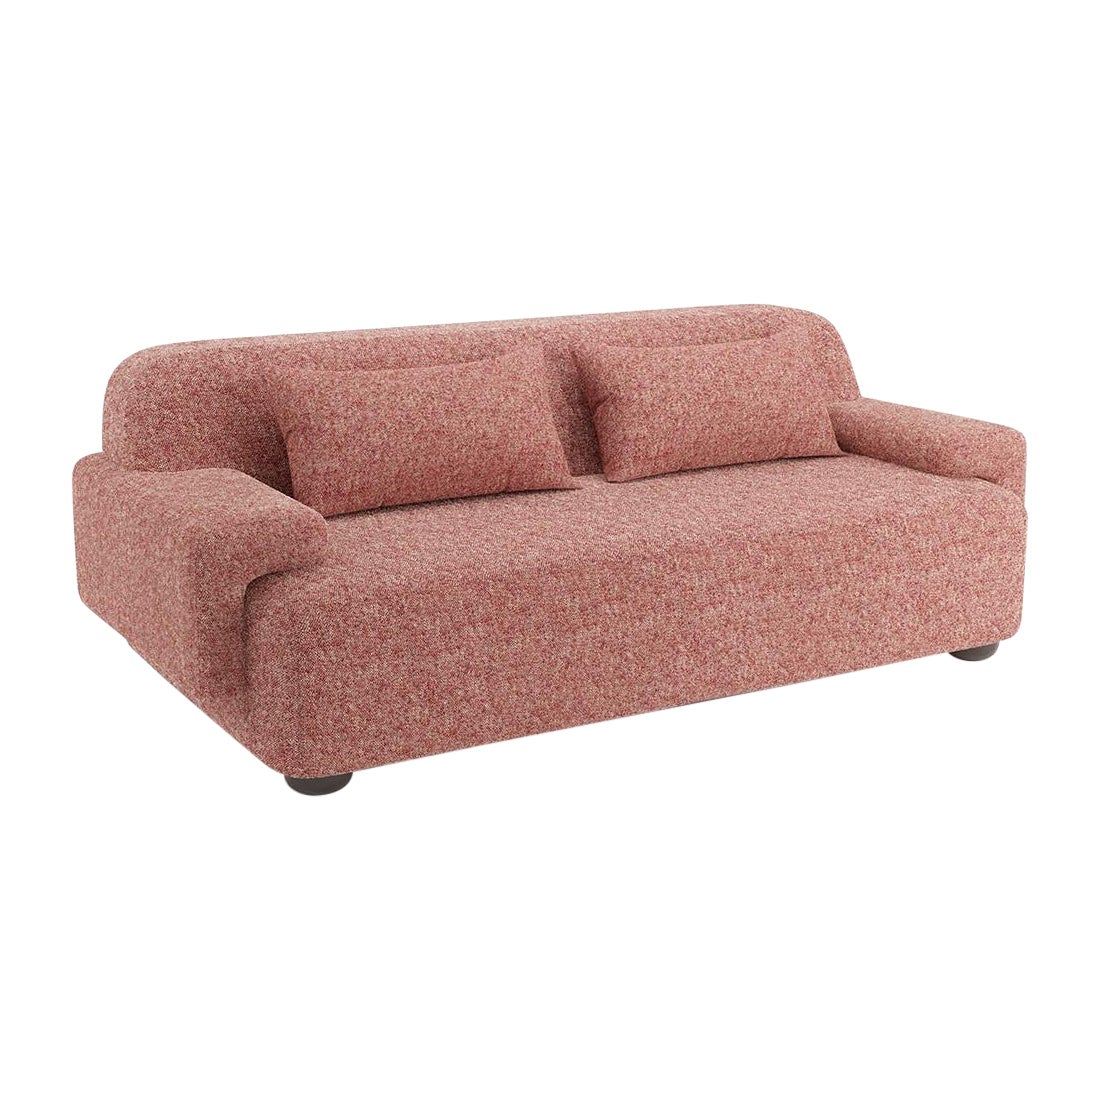 Popus Editions Lena 3 Seater Sofa in Sangria London Linen Fabric For Sale